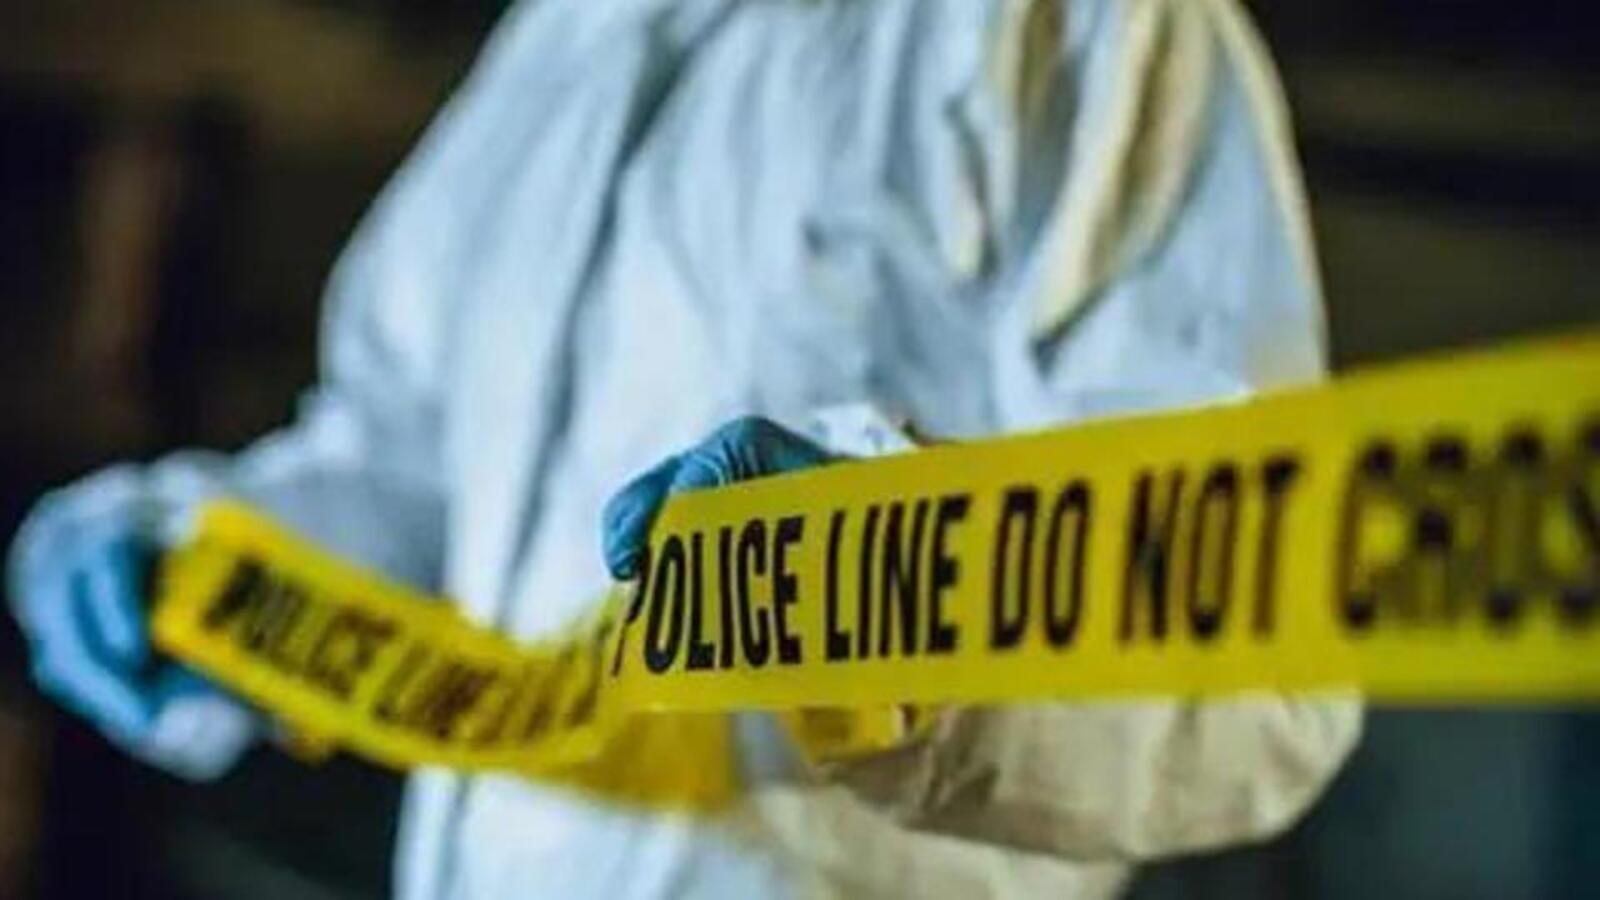 Mumbai financial exec killed and thrown from 7th floor by wife, son: Police